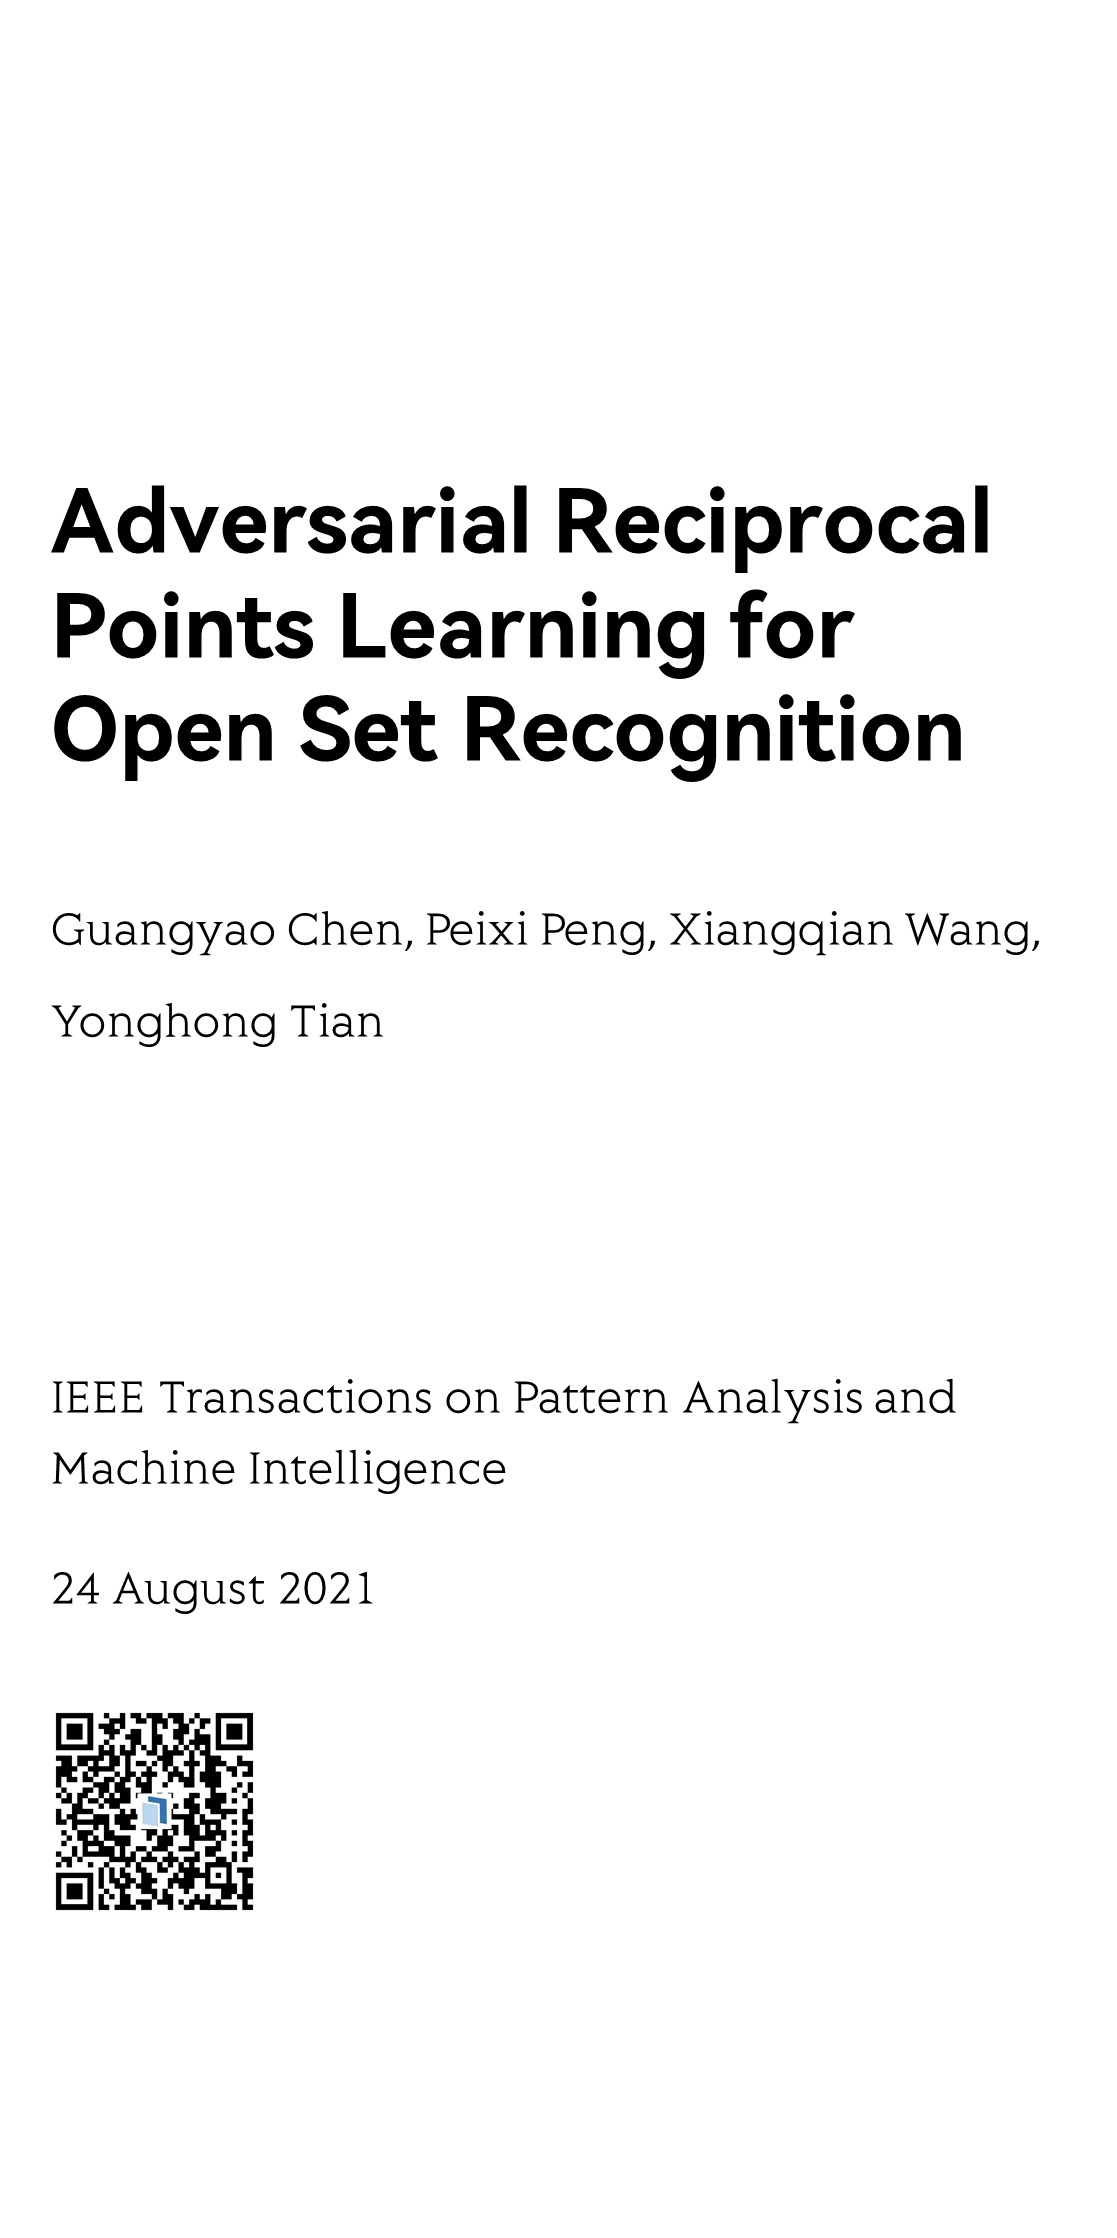 Adversarial Reciprocal Points Learning for Open Set Recognition_1